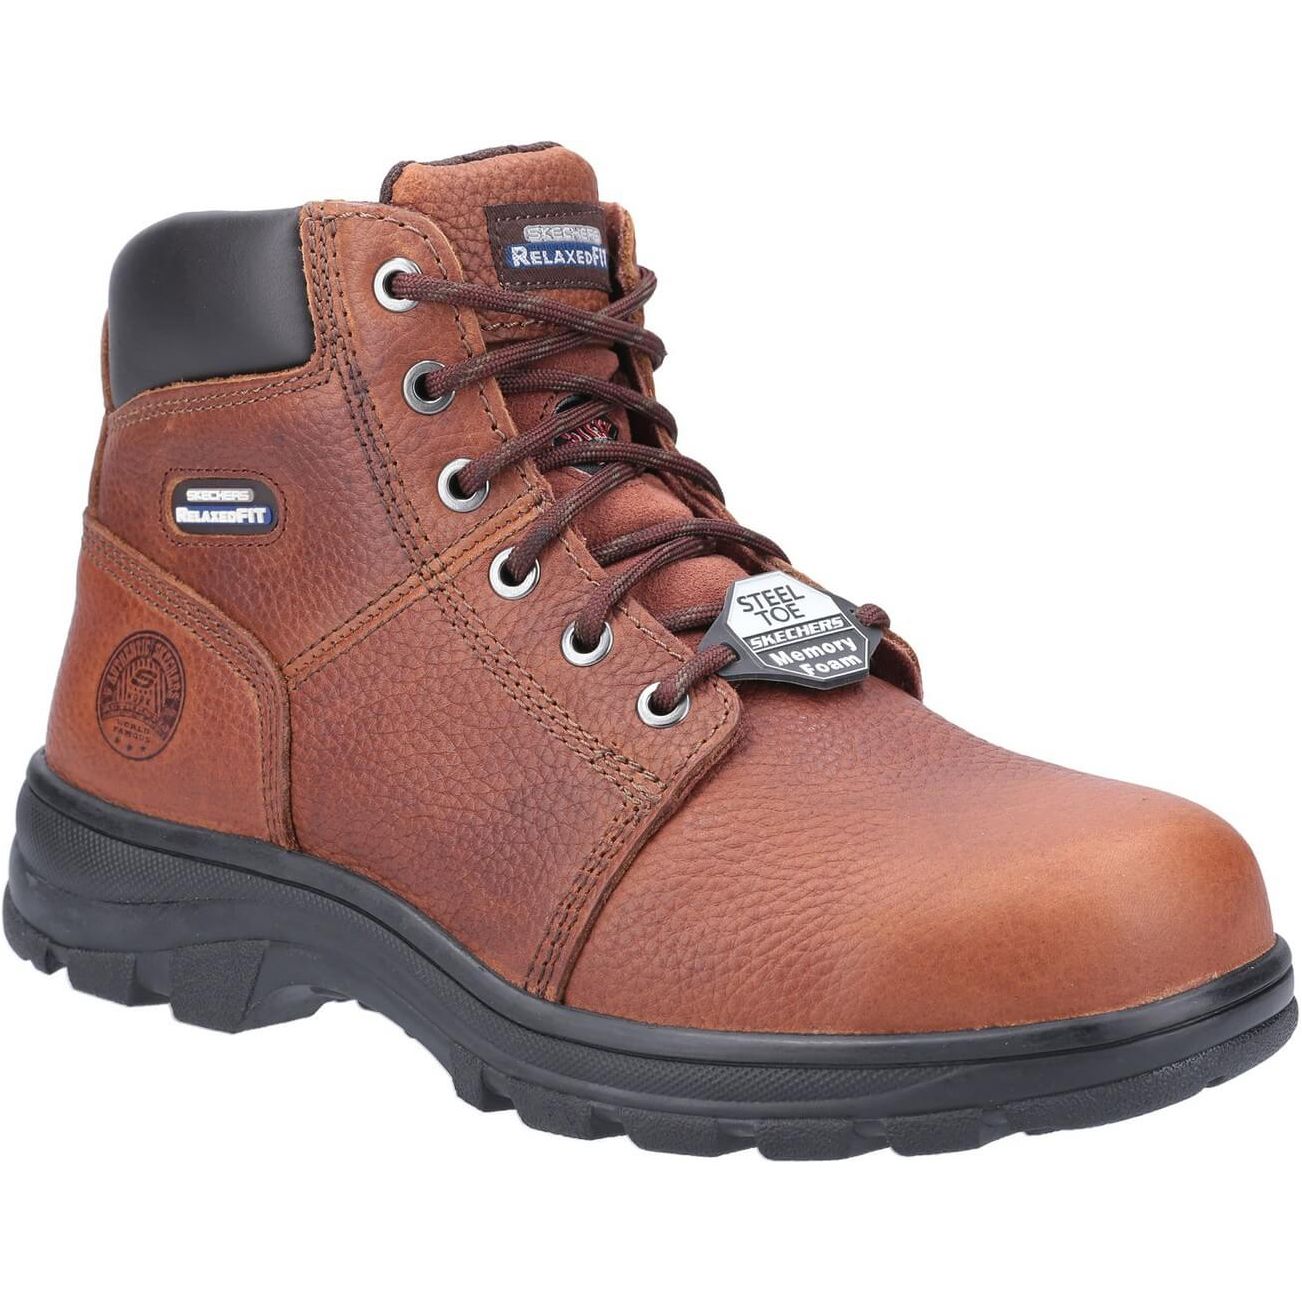 Skechers Workshire Work Safety Boots - Mens - Sale